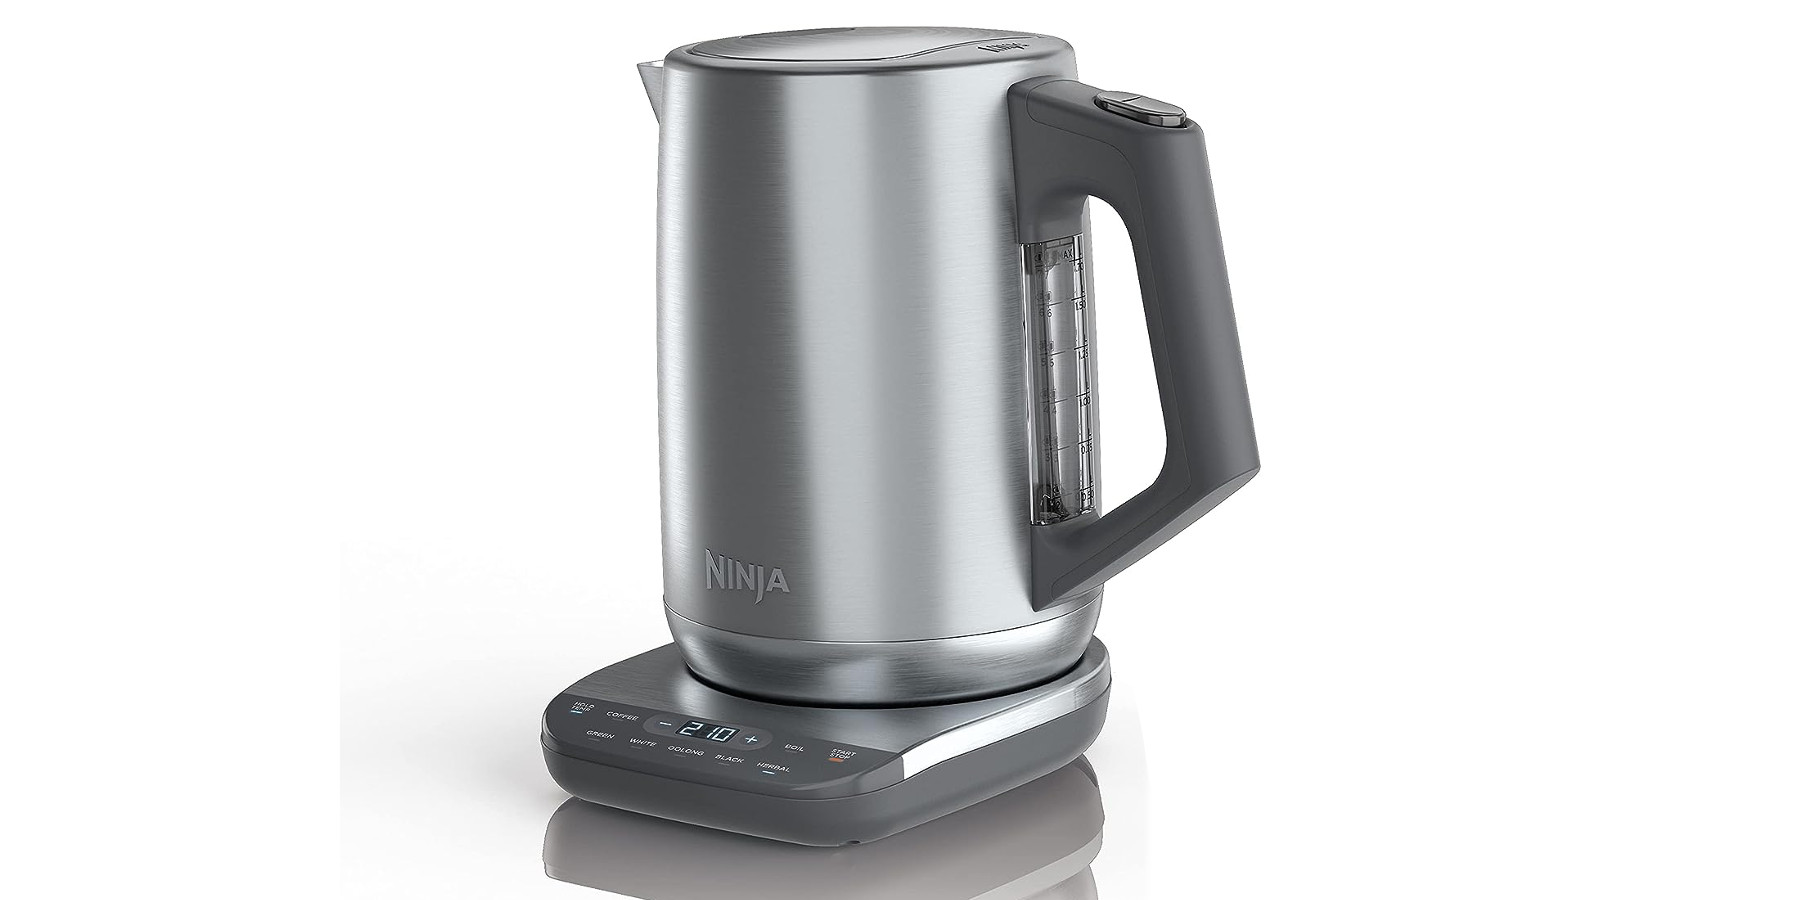 Best price in months hits Ninja's Precision Temperature Electric Kettle at  $63 (30% off)